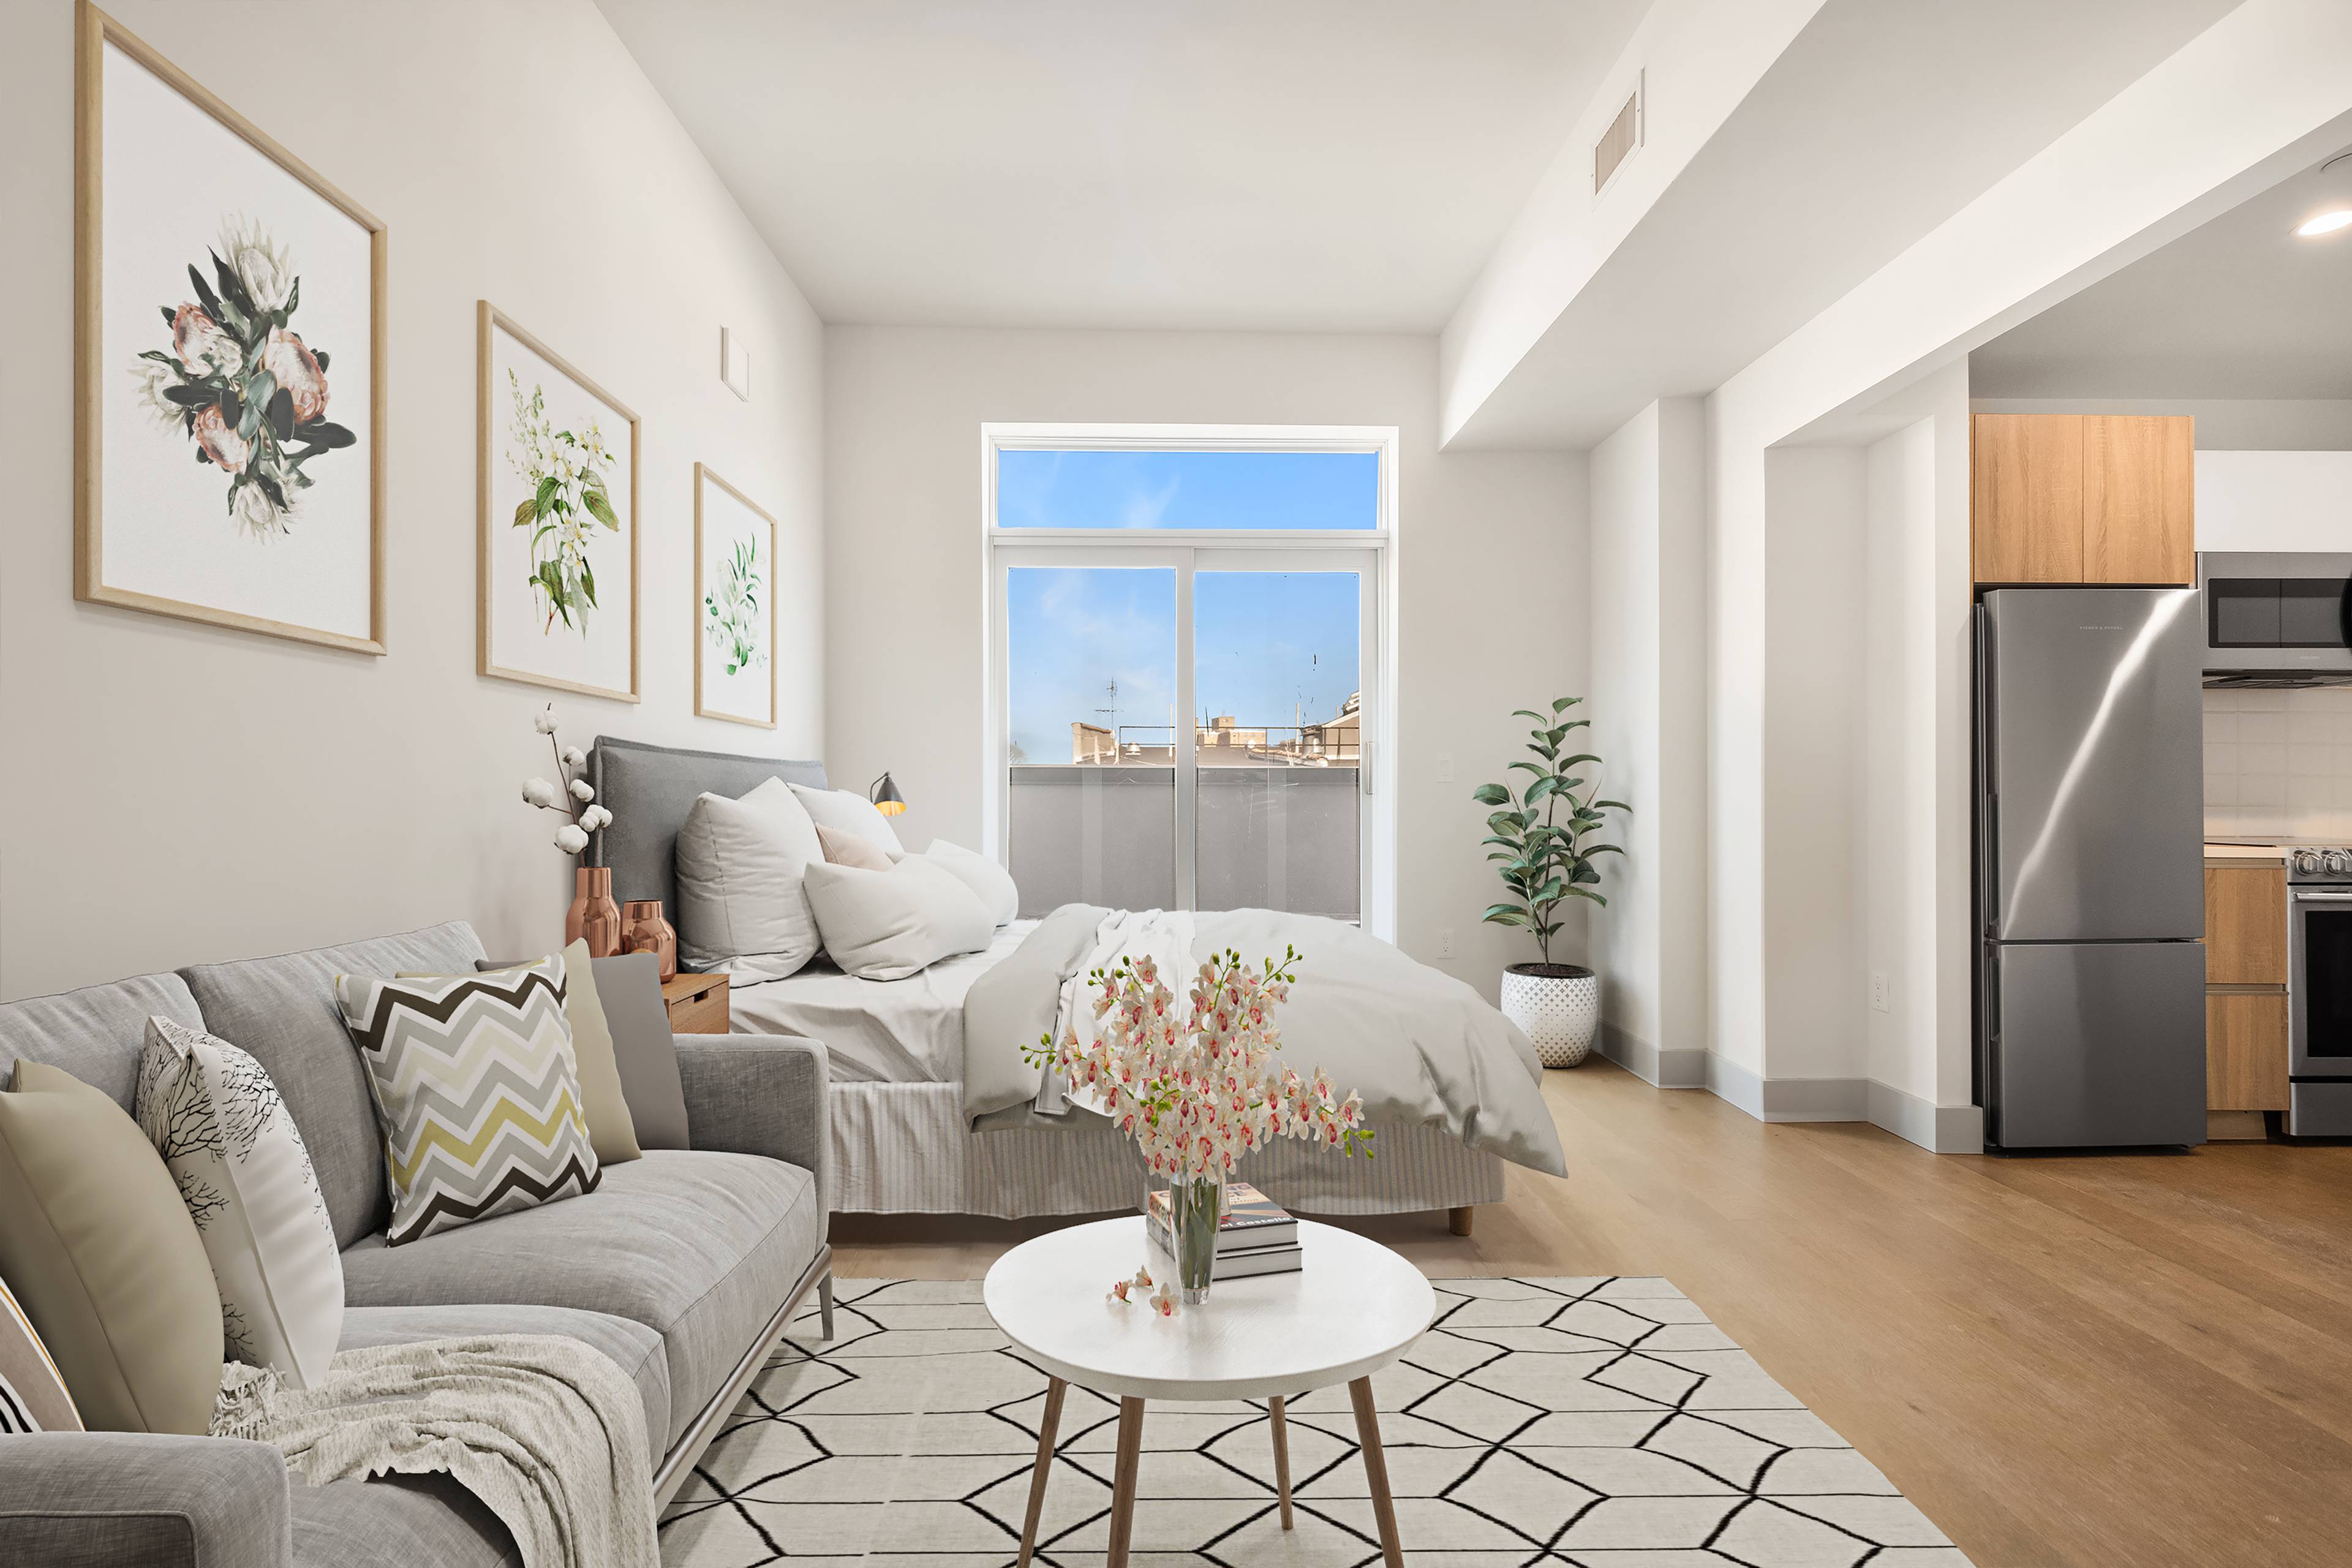 This spacious and bright studio condominium welcomes you home with stunning designer finishes, a balcony and great amenities, including onsite parking.